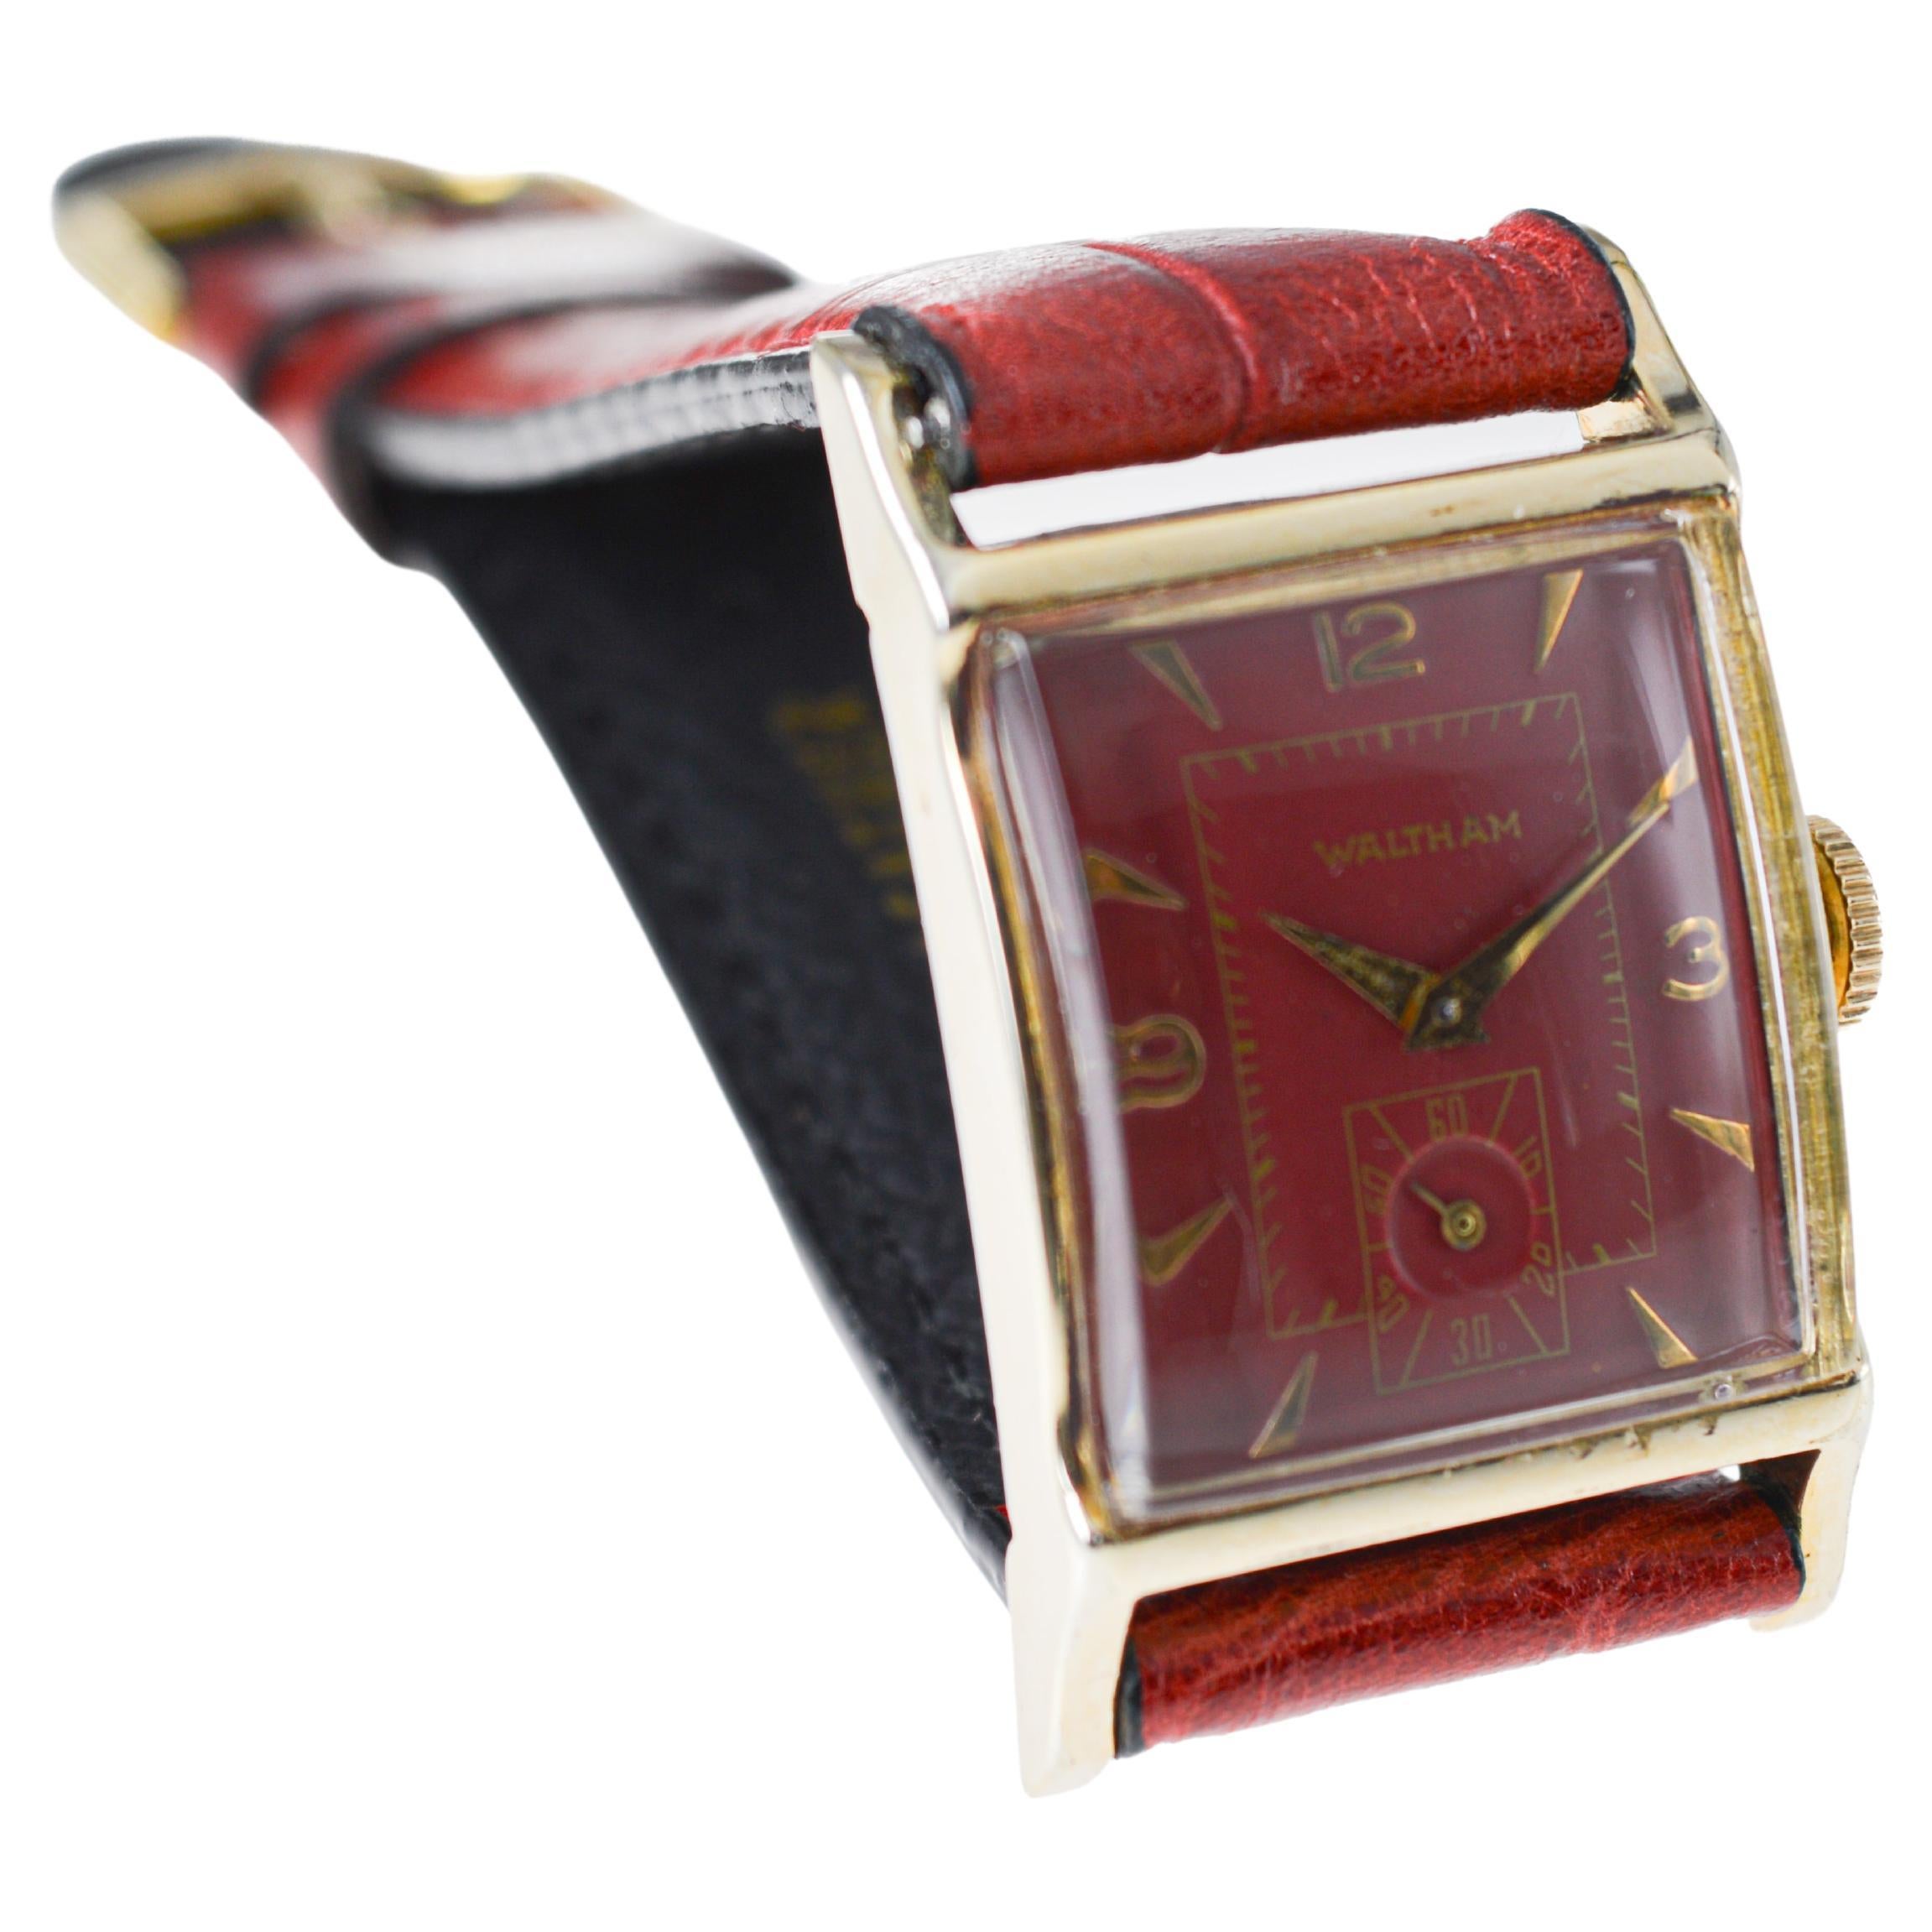 Waltham Gold-Filled Art Deco Watch with Custom Red Dial circa, 1950's For Sale 3